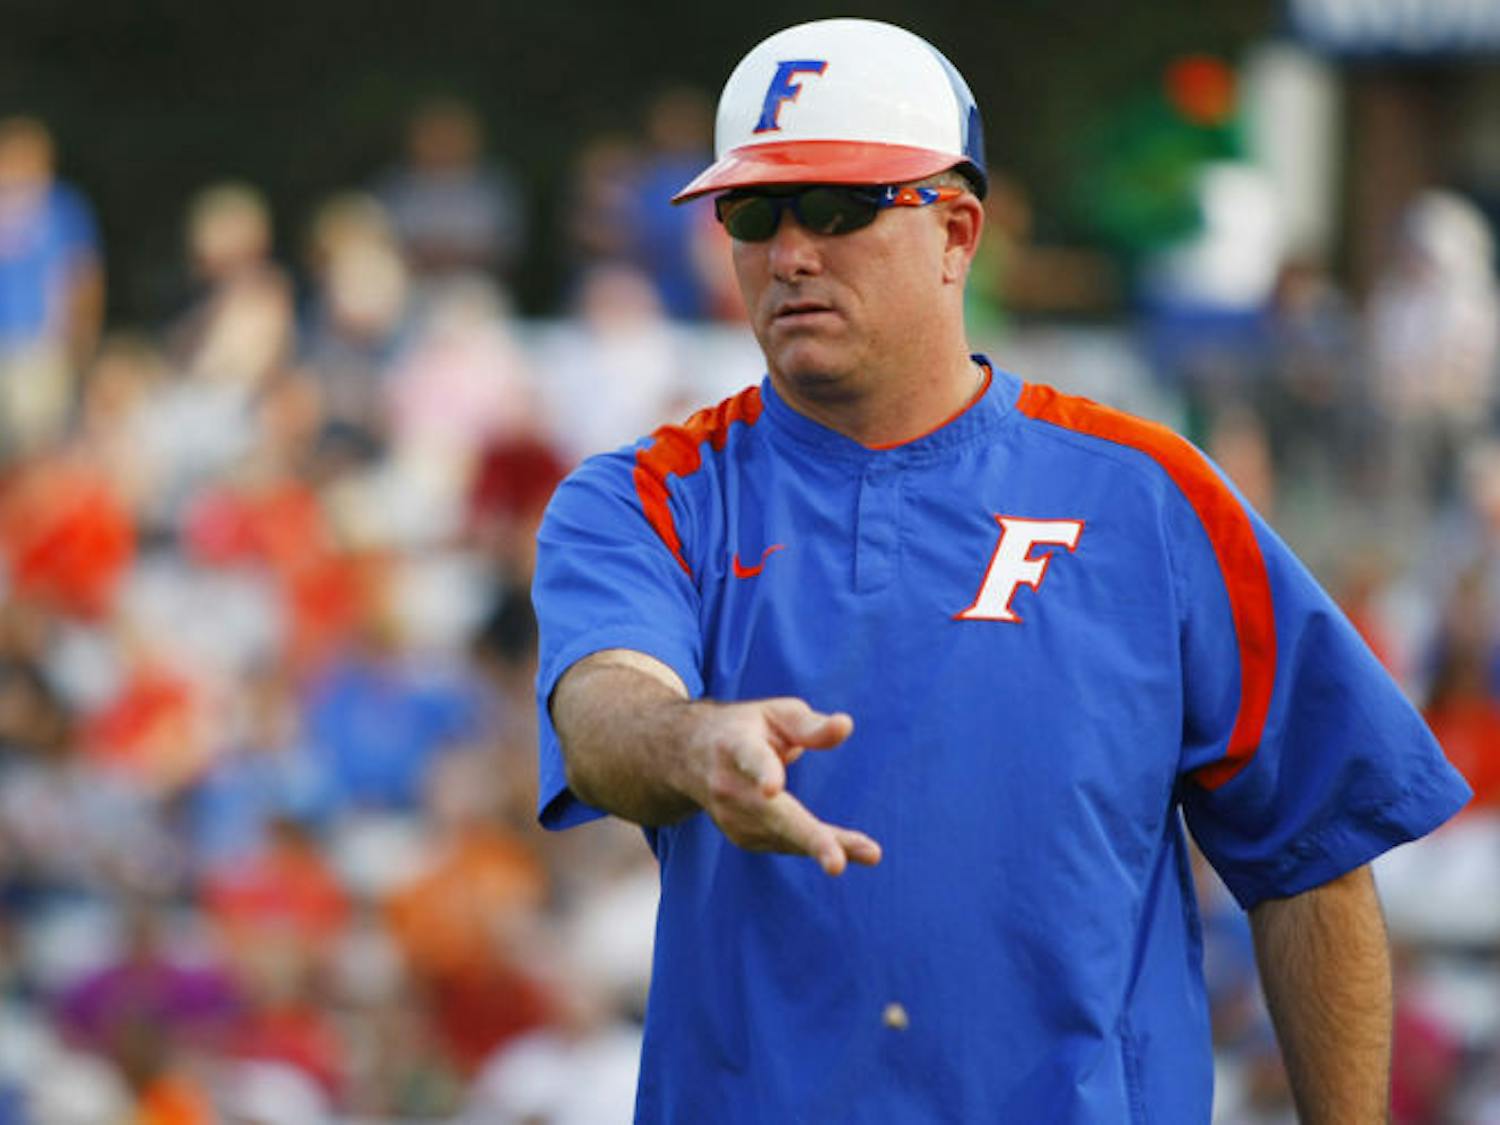 Coach Tim Walton signals to a base runner during Florida’s 3-1 victory against Auburn on April 14, 2012 at Katie Seashole Pressly Stadium. Walton has started freshman Taylor Schwarz at first base in every Southeastern Conference game.
